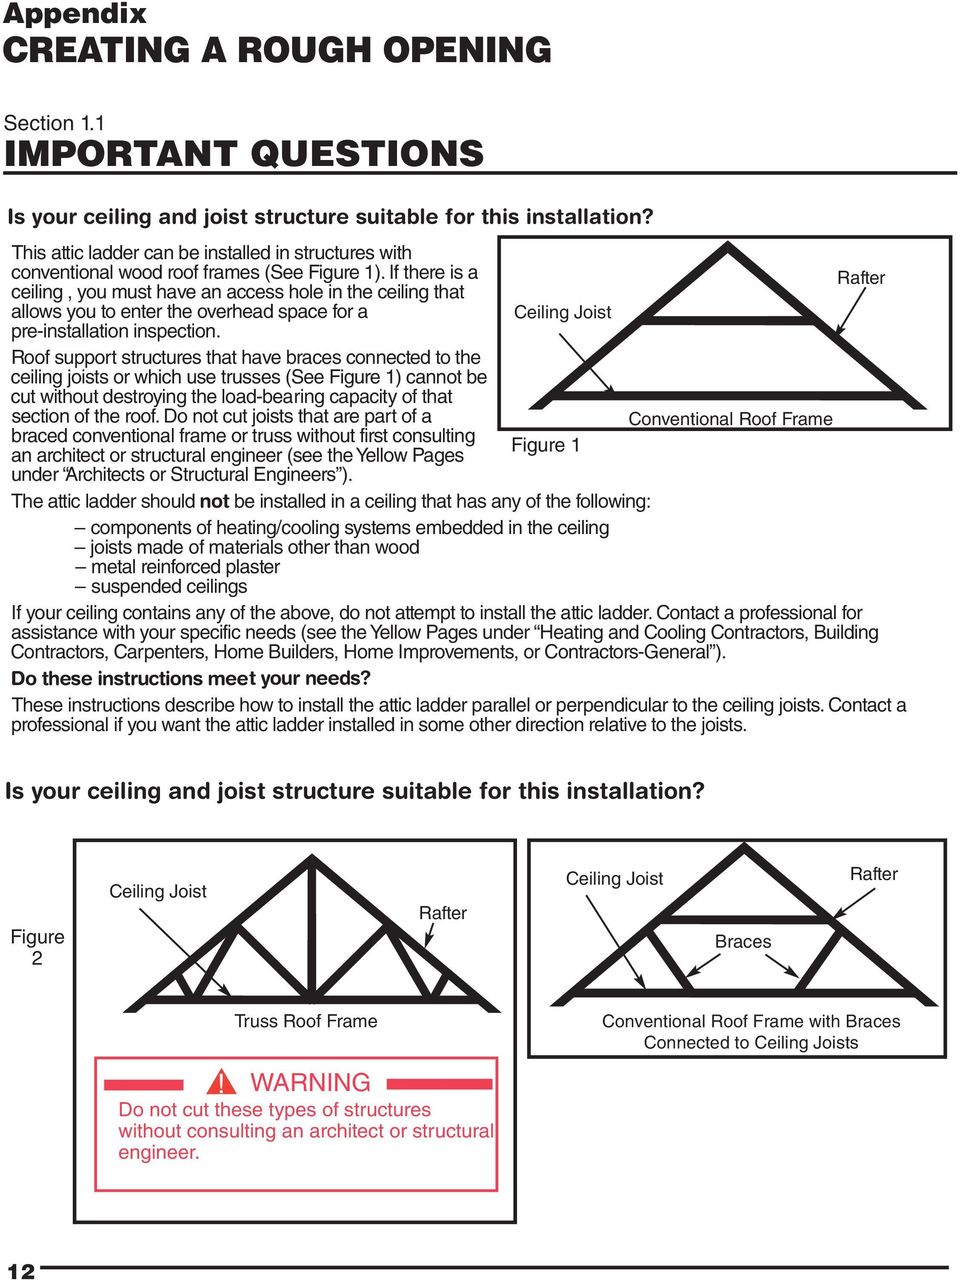 If there is a Rafter ceiling, you must have an access hole in the ceiling that allows you to enter the overhead space for a Ceiling Joist pre-installation inspection.